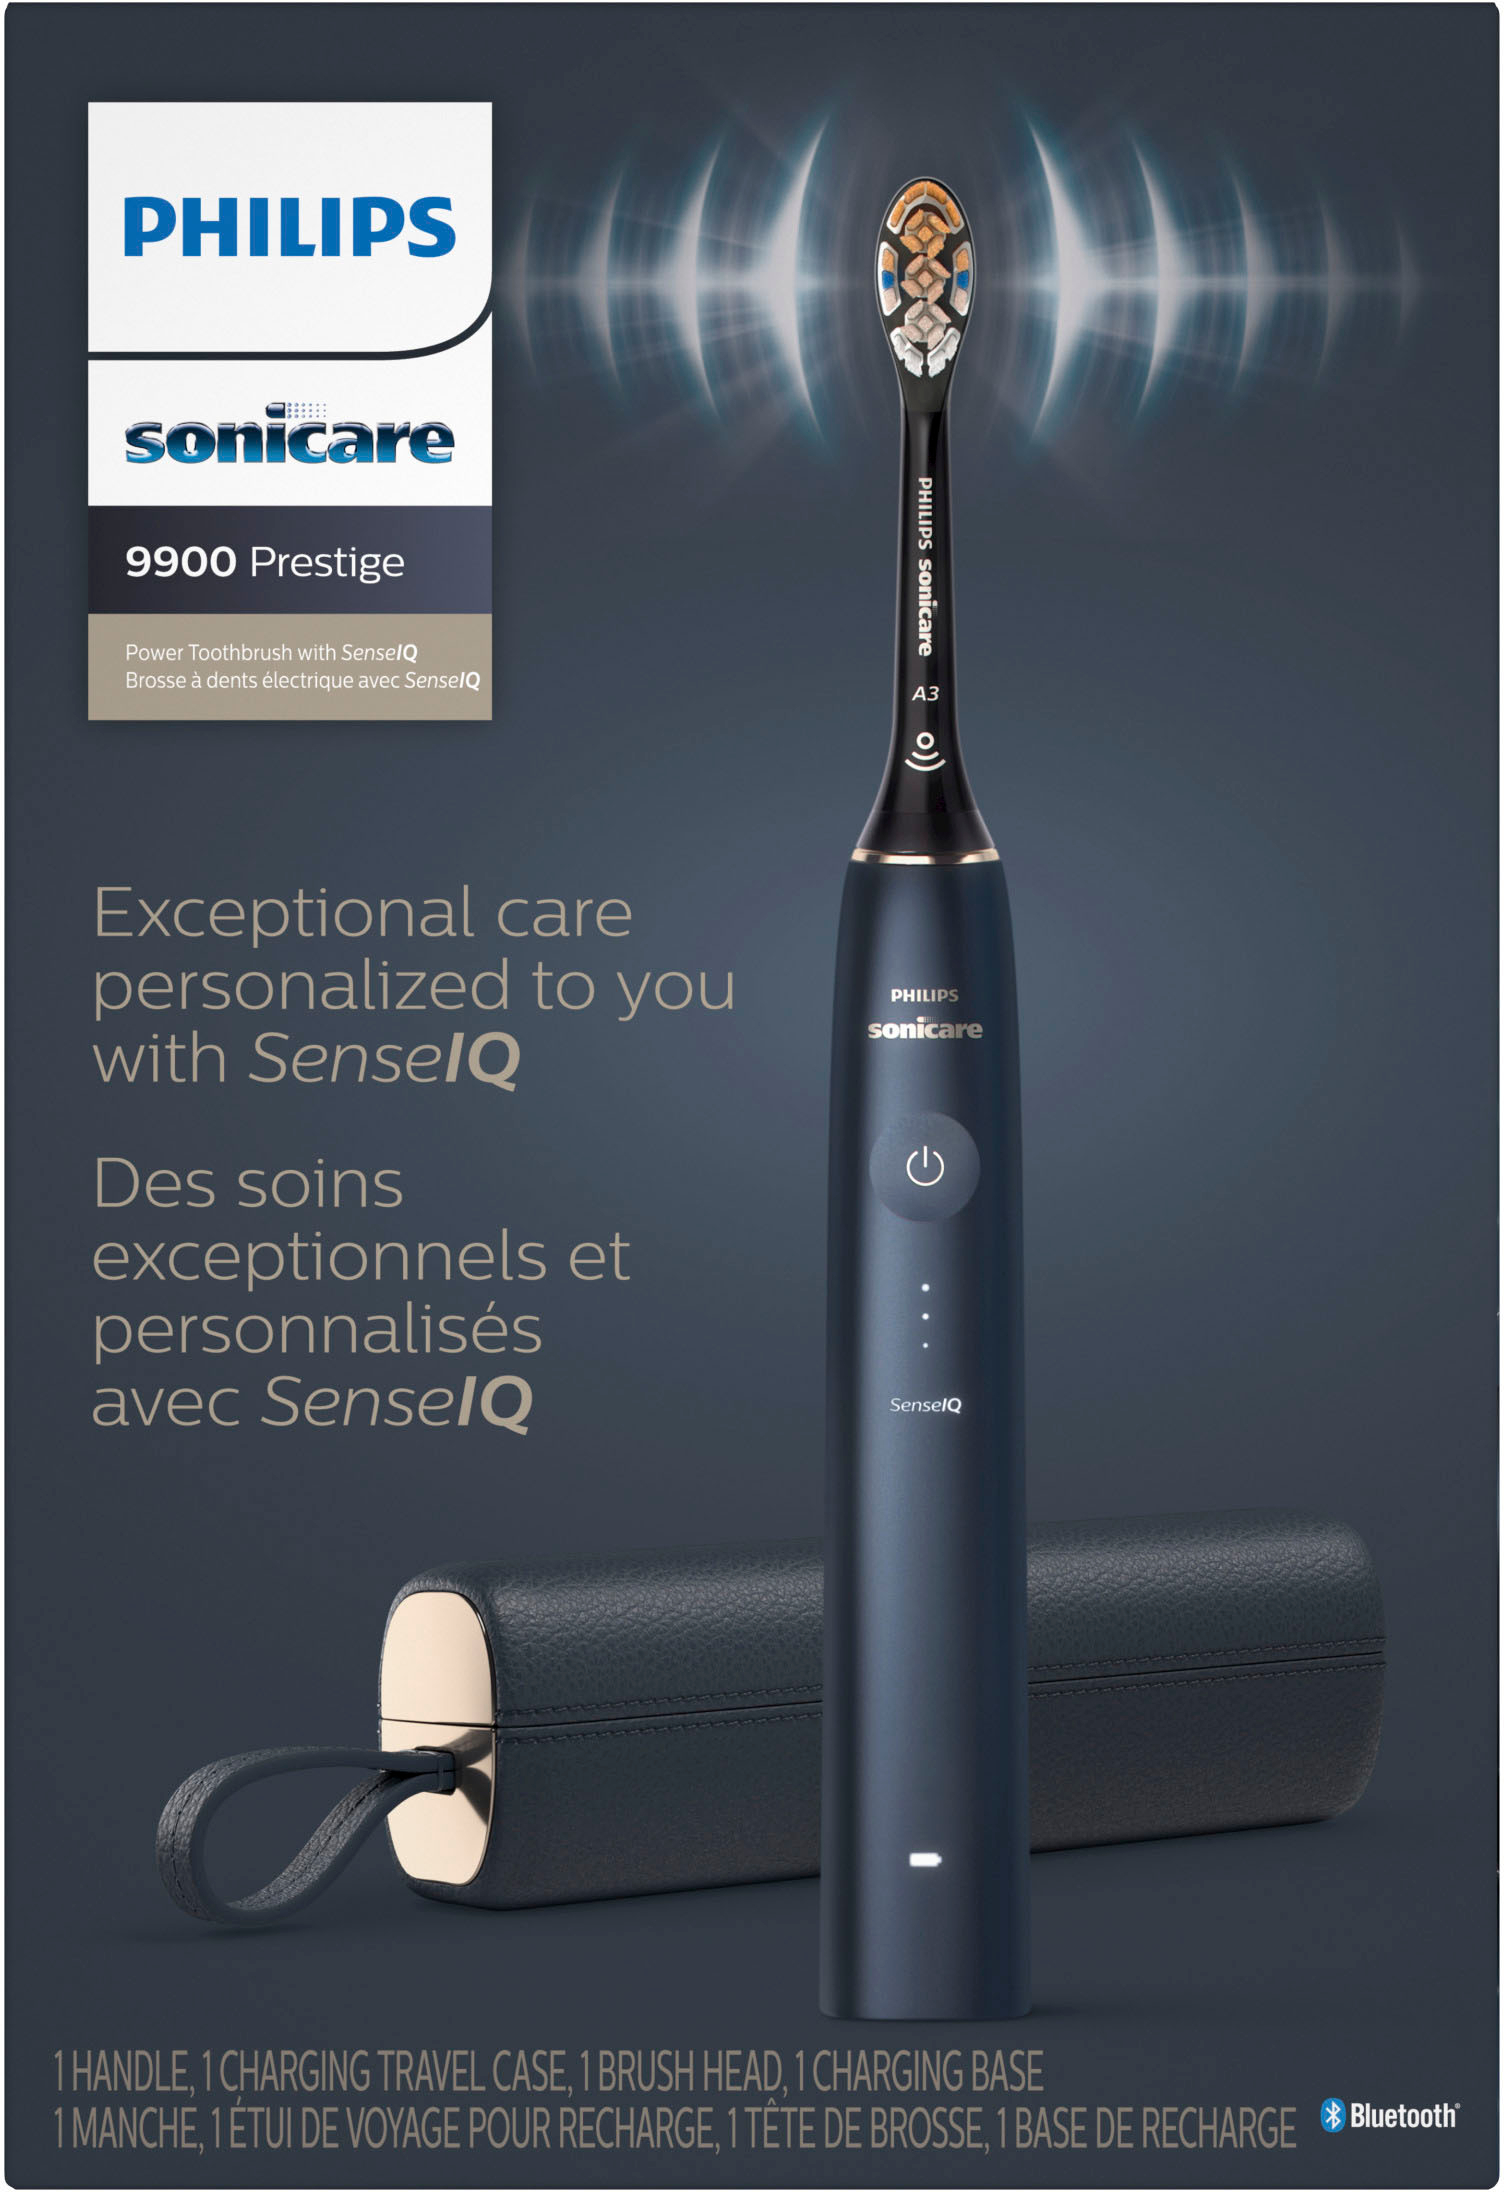 Philips Sonicare Hx9990/12 9900 Prestige Rechargeable Electric Toothbrush with SenseIQ, Midnight